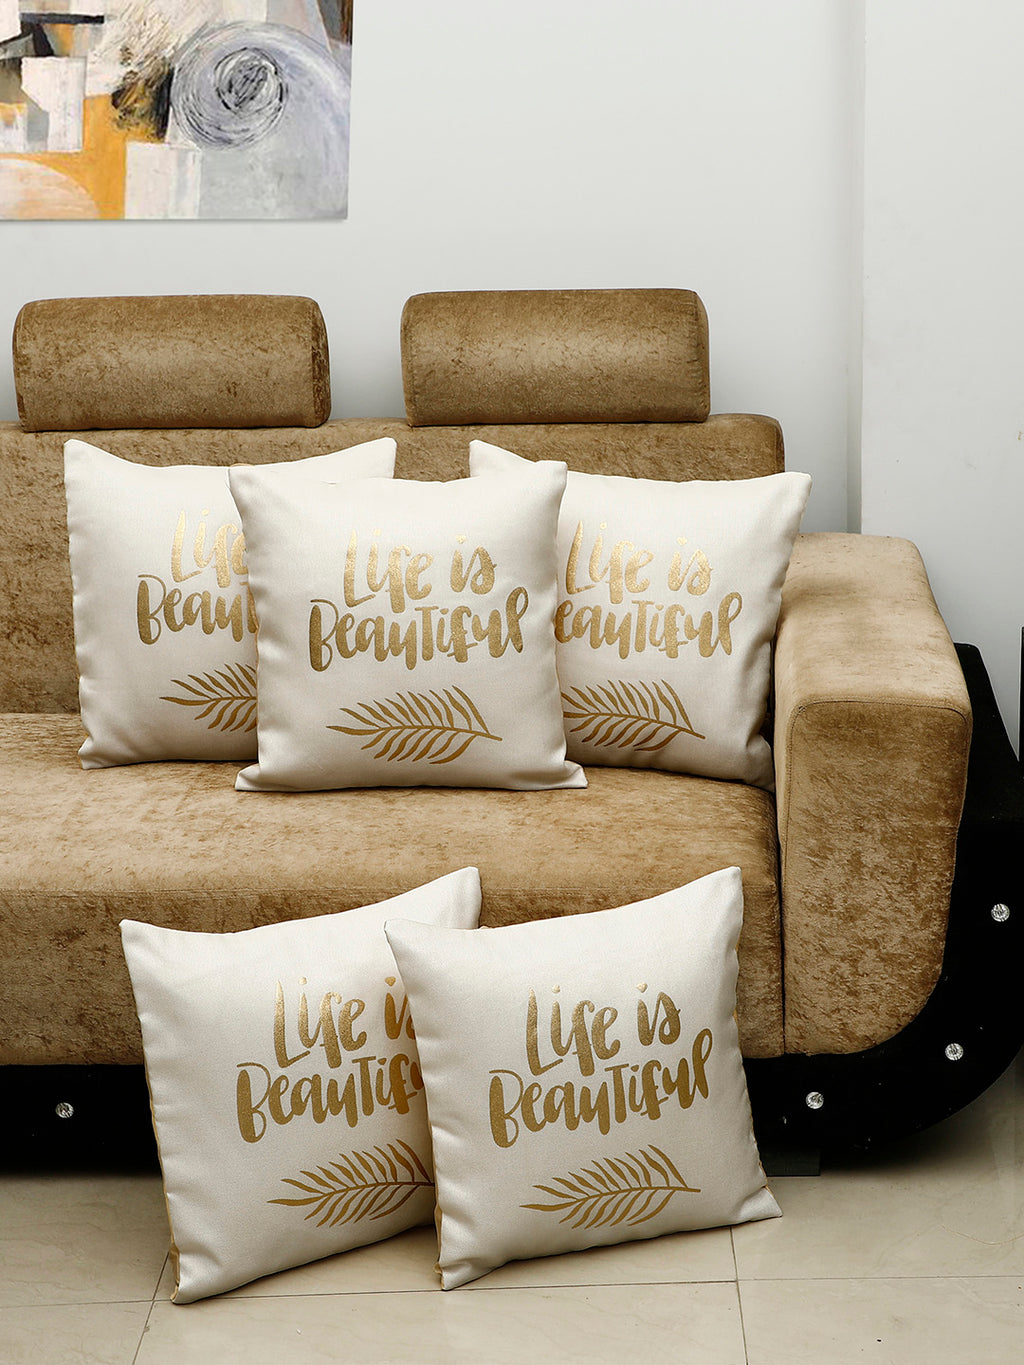 Detec™ Hosta Beige Color 16 x 16 inches Golden Printed Cushion Cover (Set of 5)